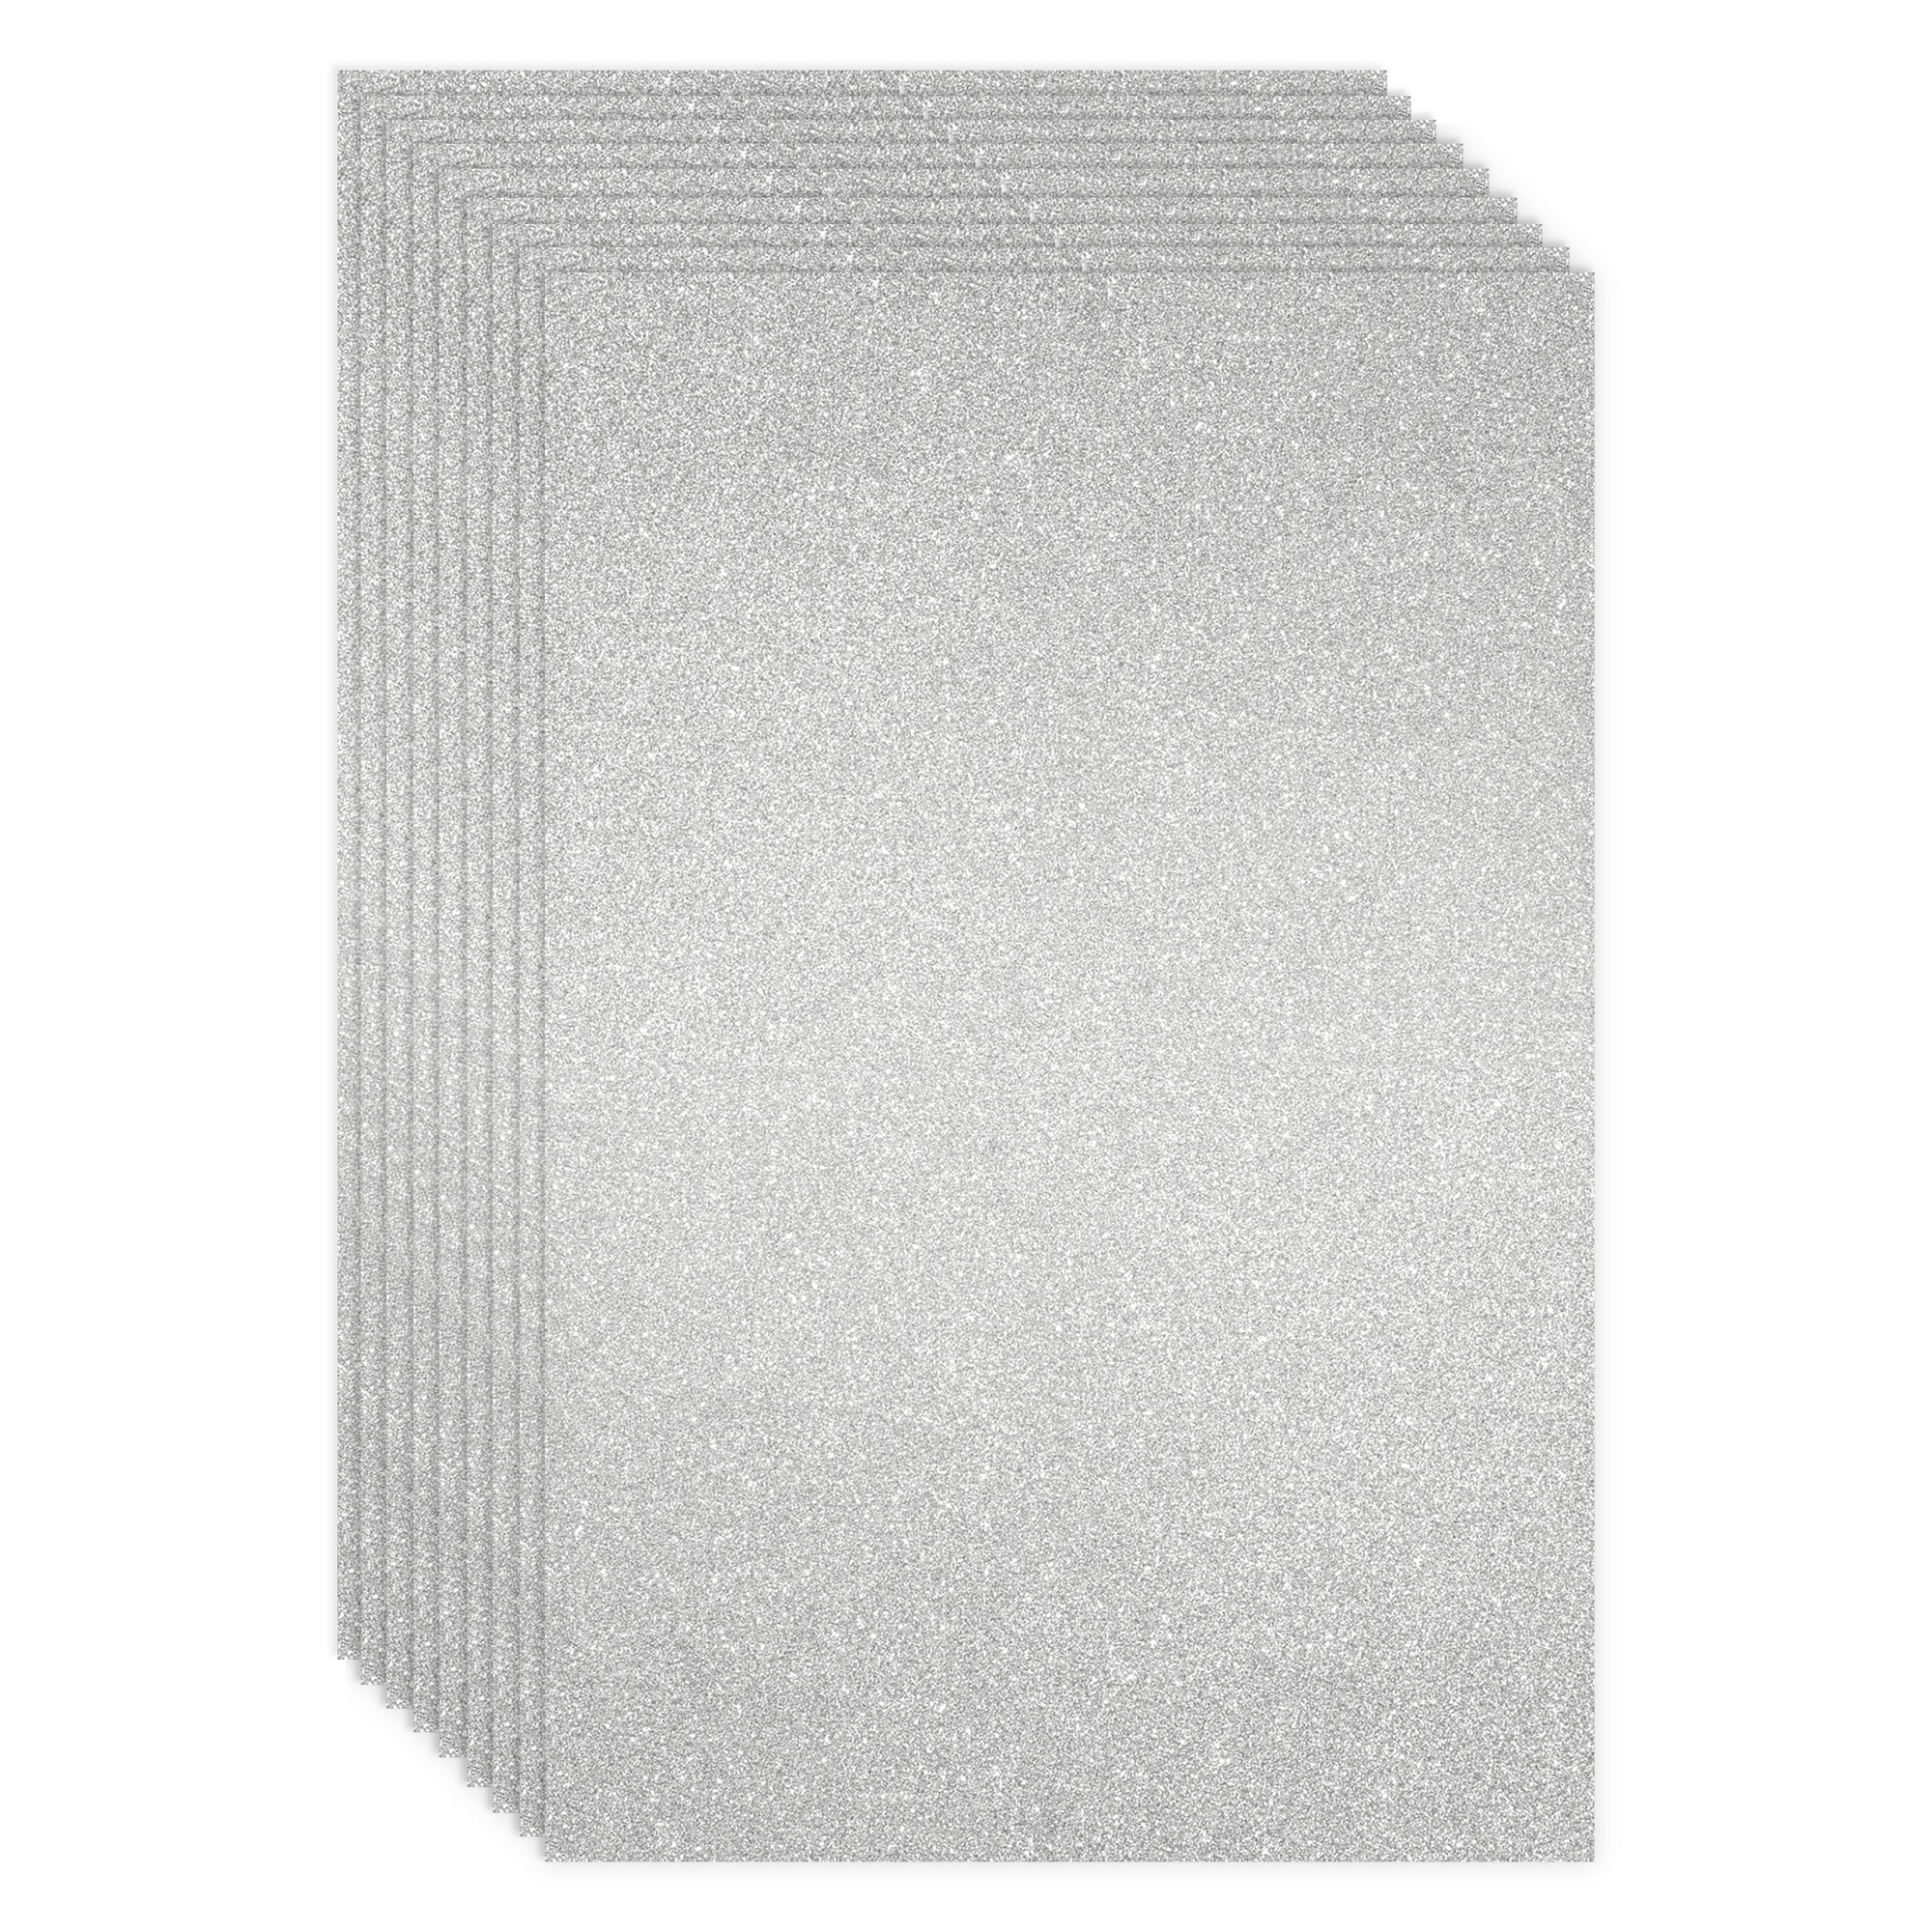 24 Sheets Silver Glitter Cardstock Paper for Scrapbooking, Arts, DIY  Sparkle Crafts, 250gsm, Double-Sided (8 x 12 In)